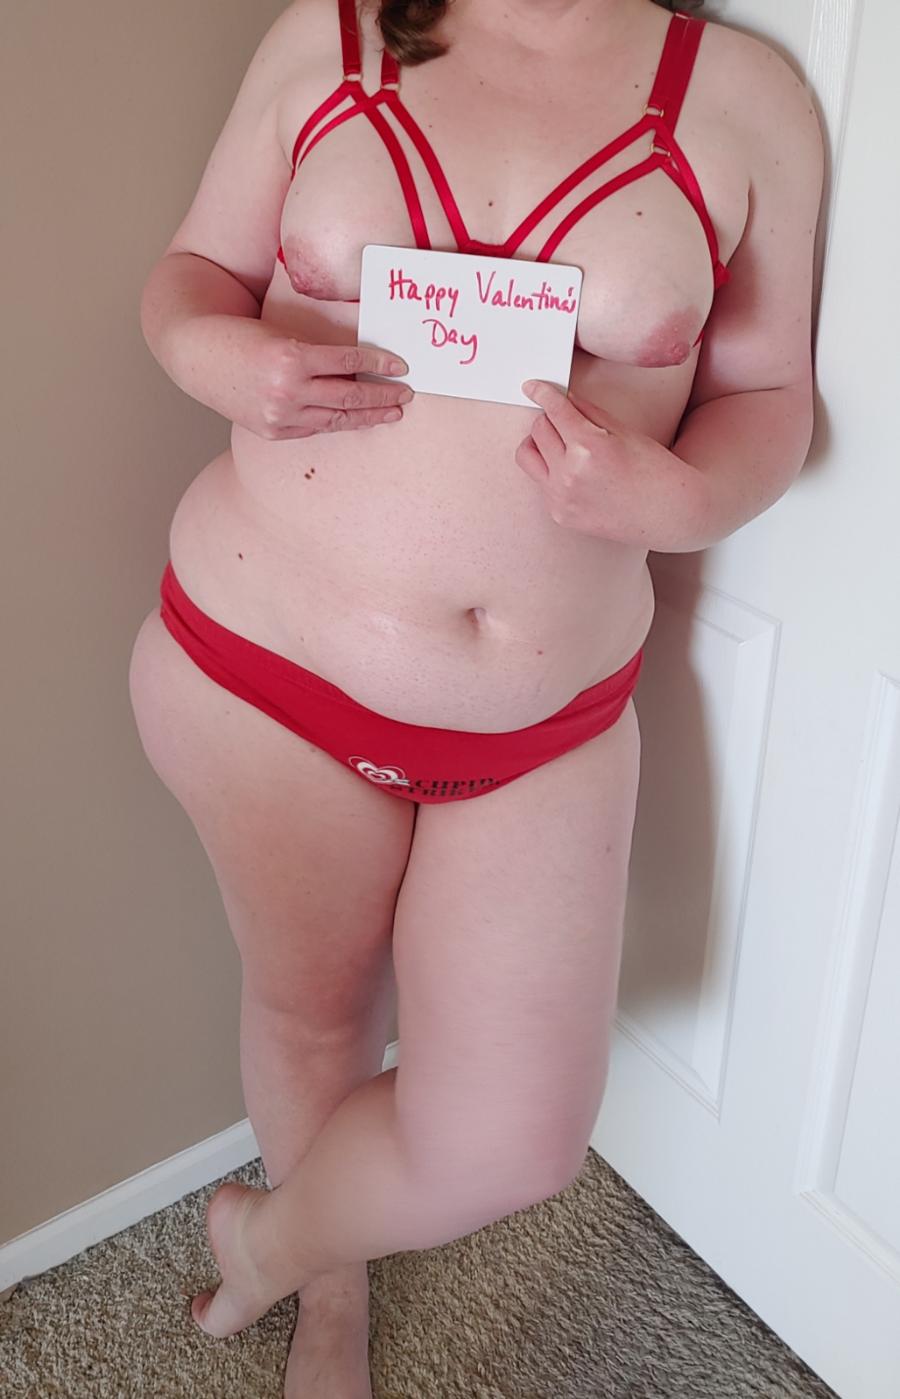 Wife with Valentine's Day Tits out and Sexy Red Message!